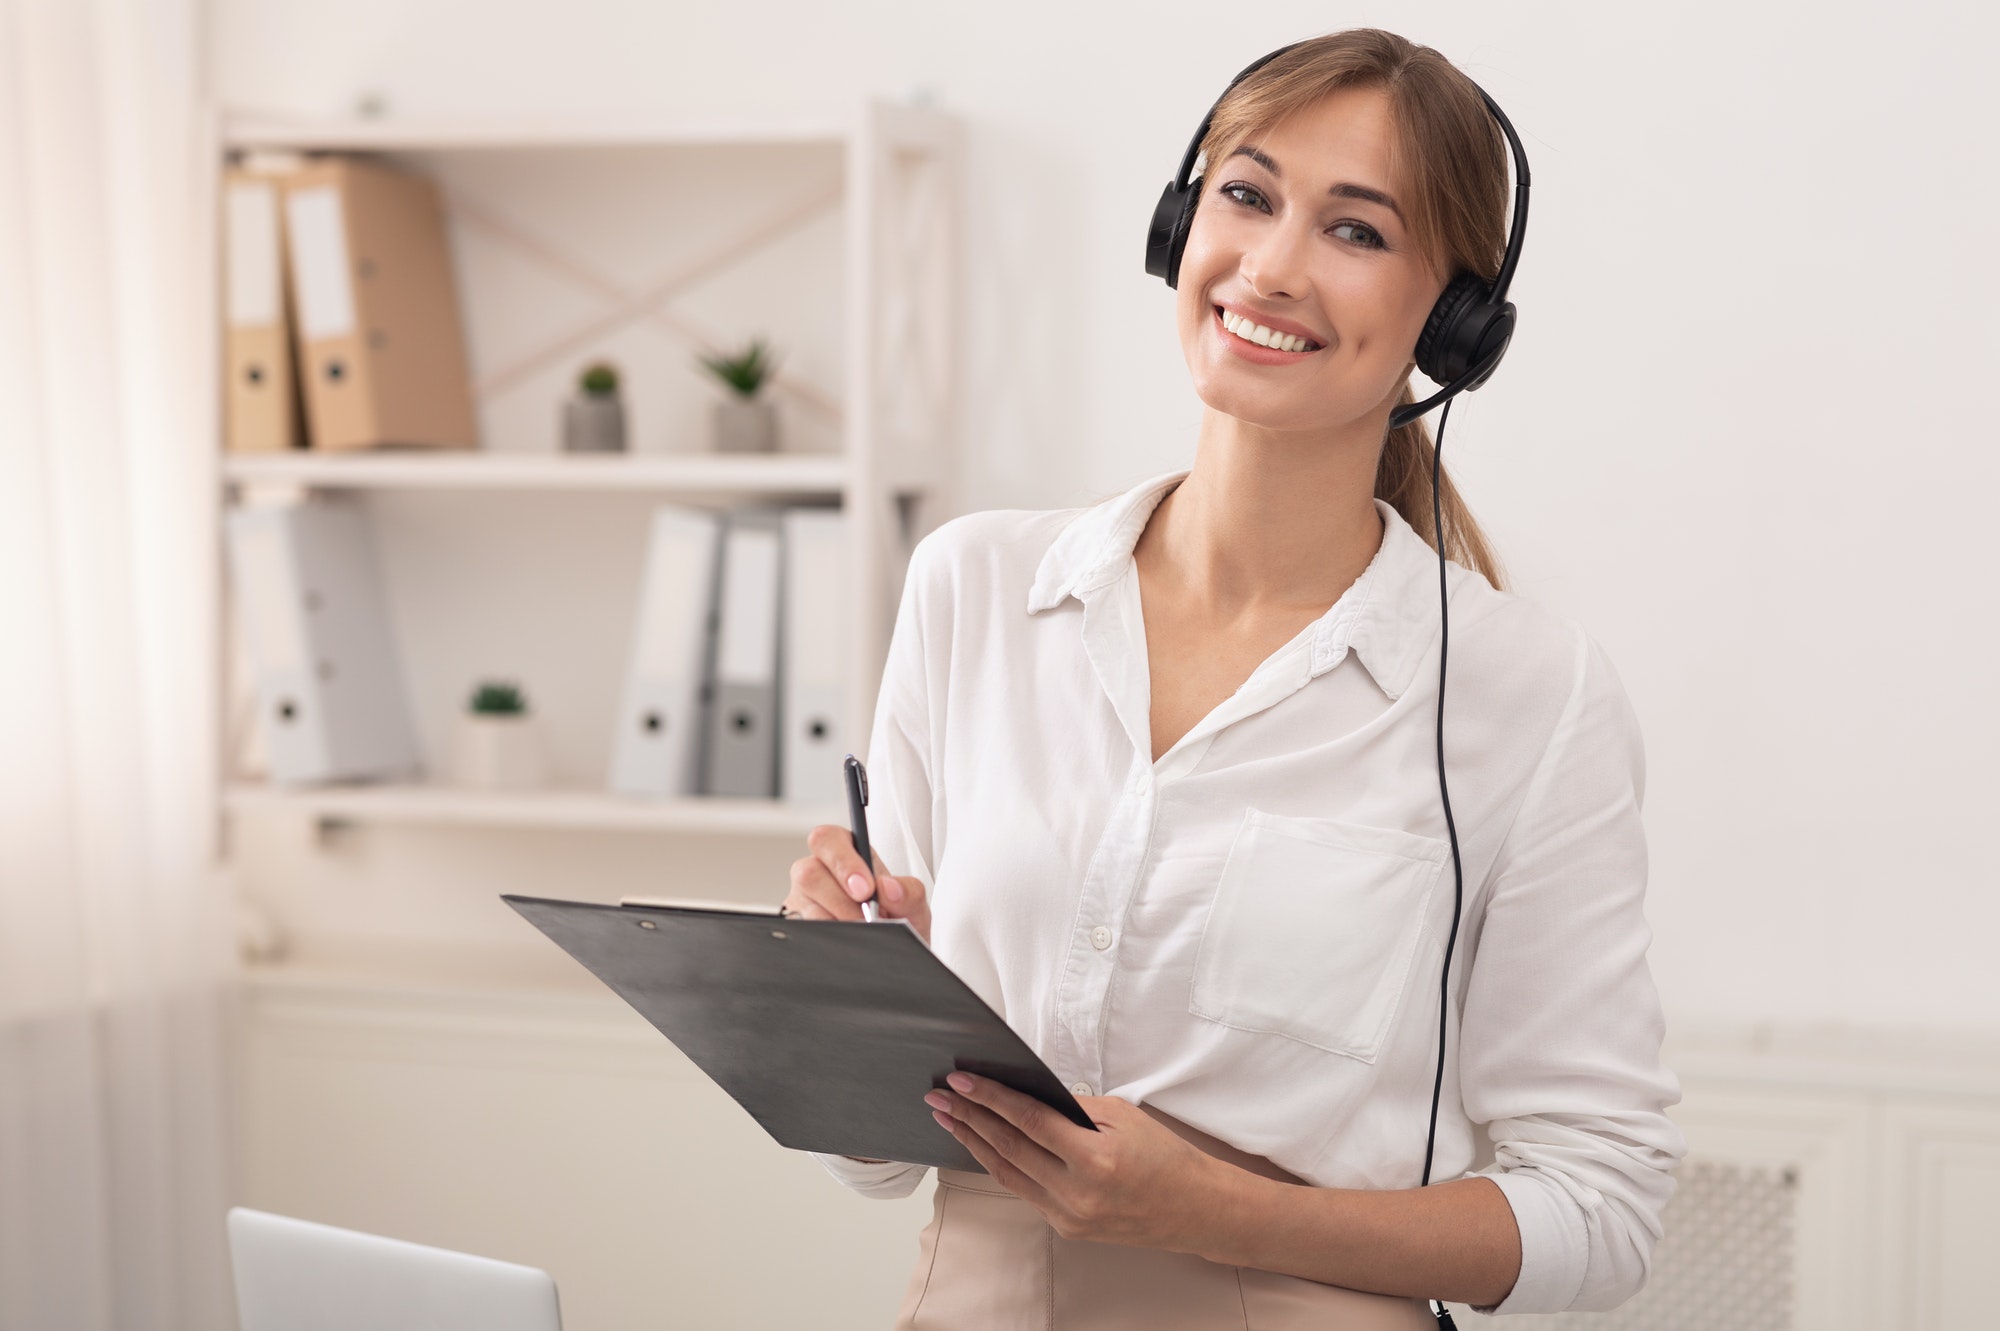 Woman In Headset Smiling Standing In Customer Support Office